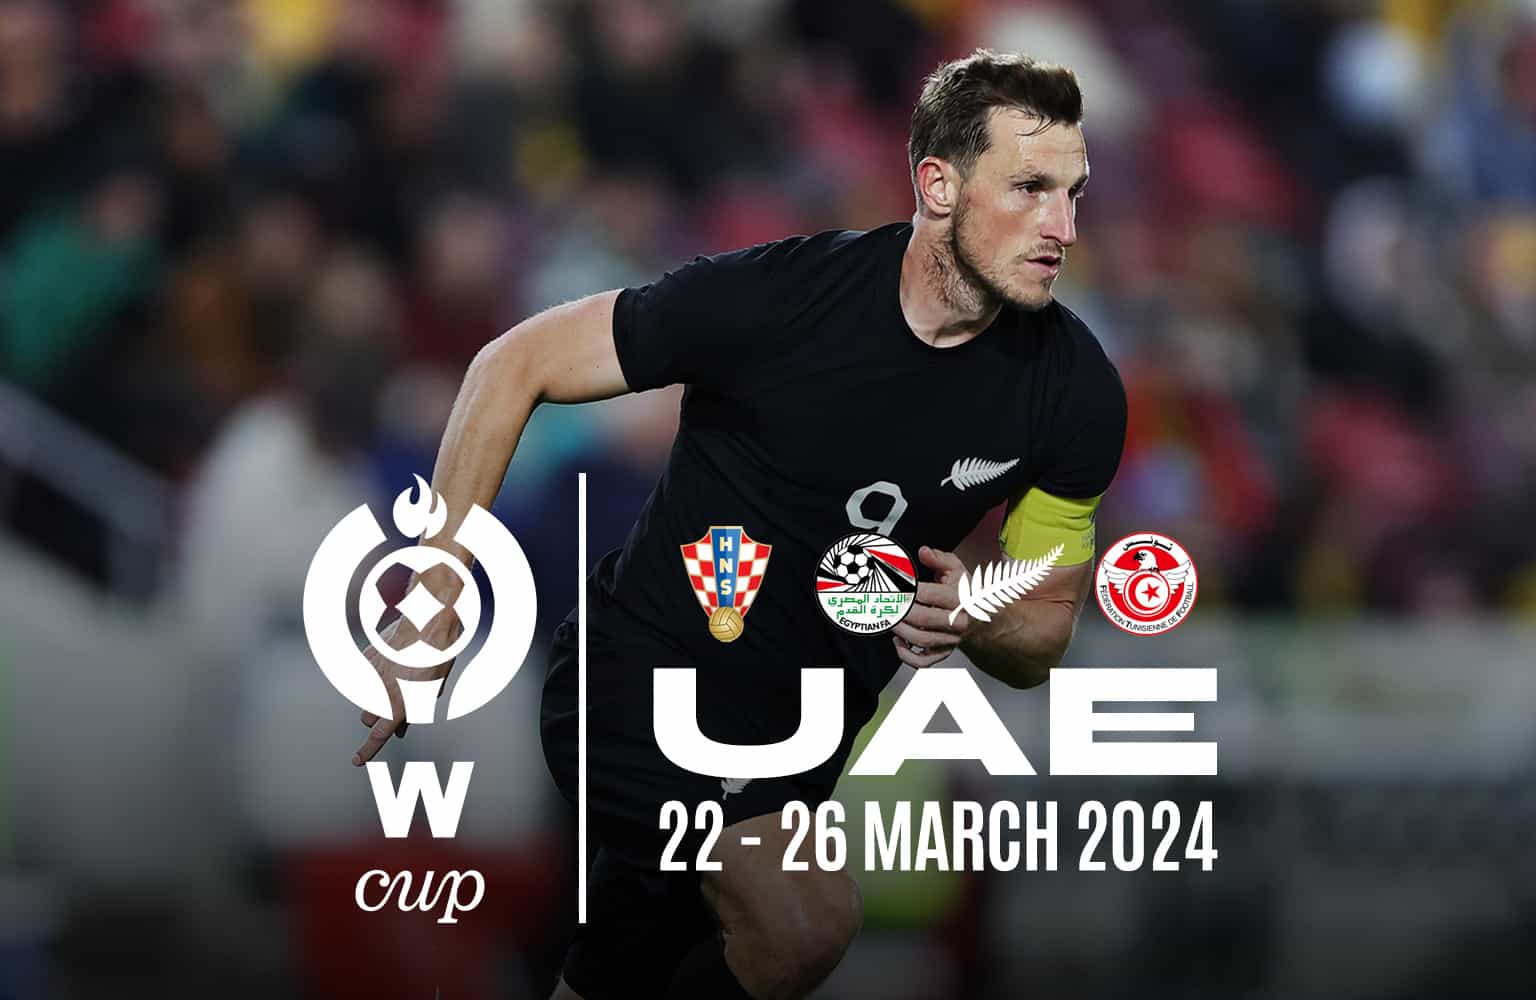 All Whites kick-off 2024 with four-team tournament alongside Croatia, Egypt  and Tunisia this March